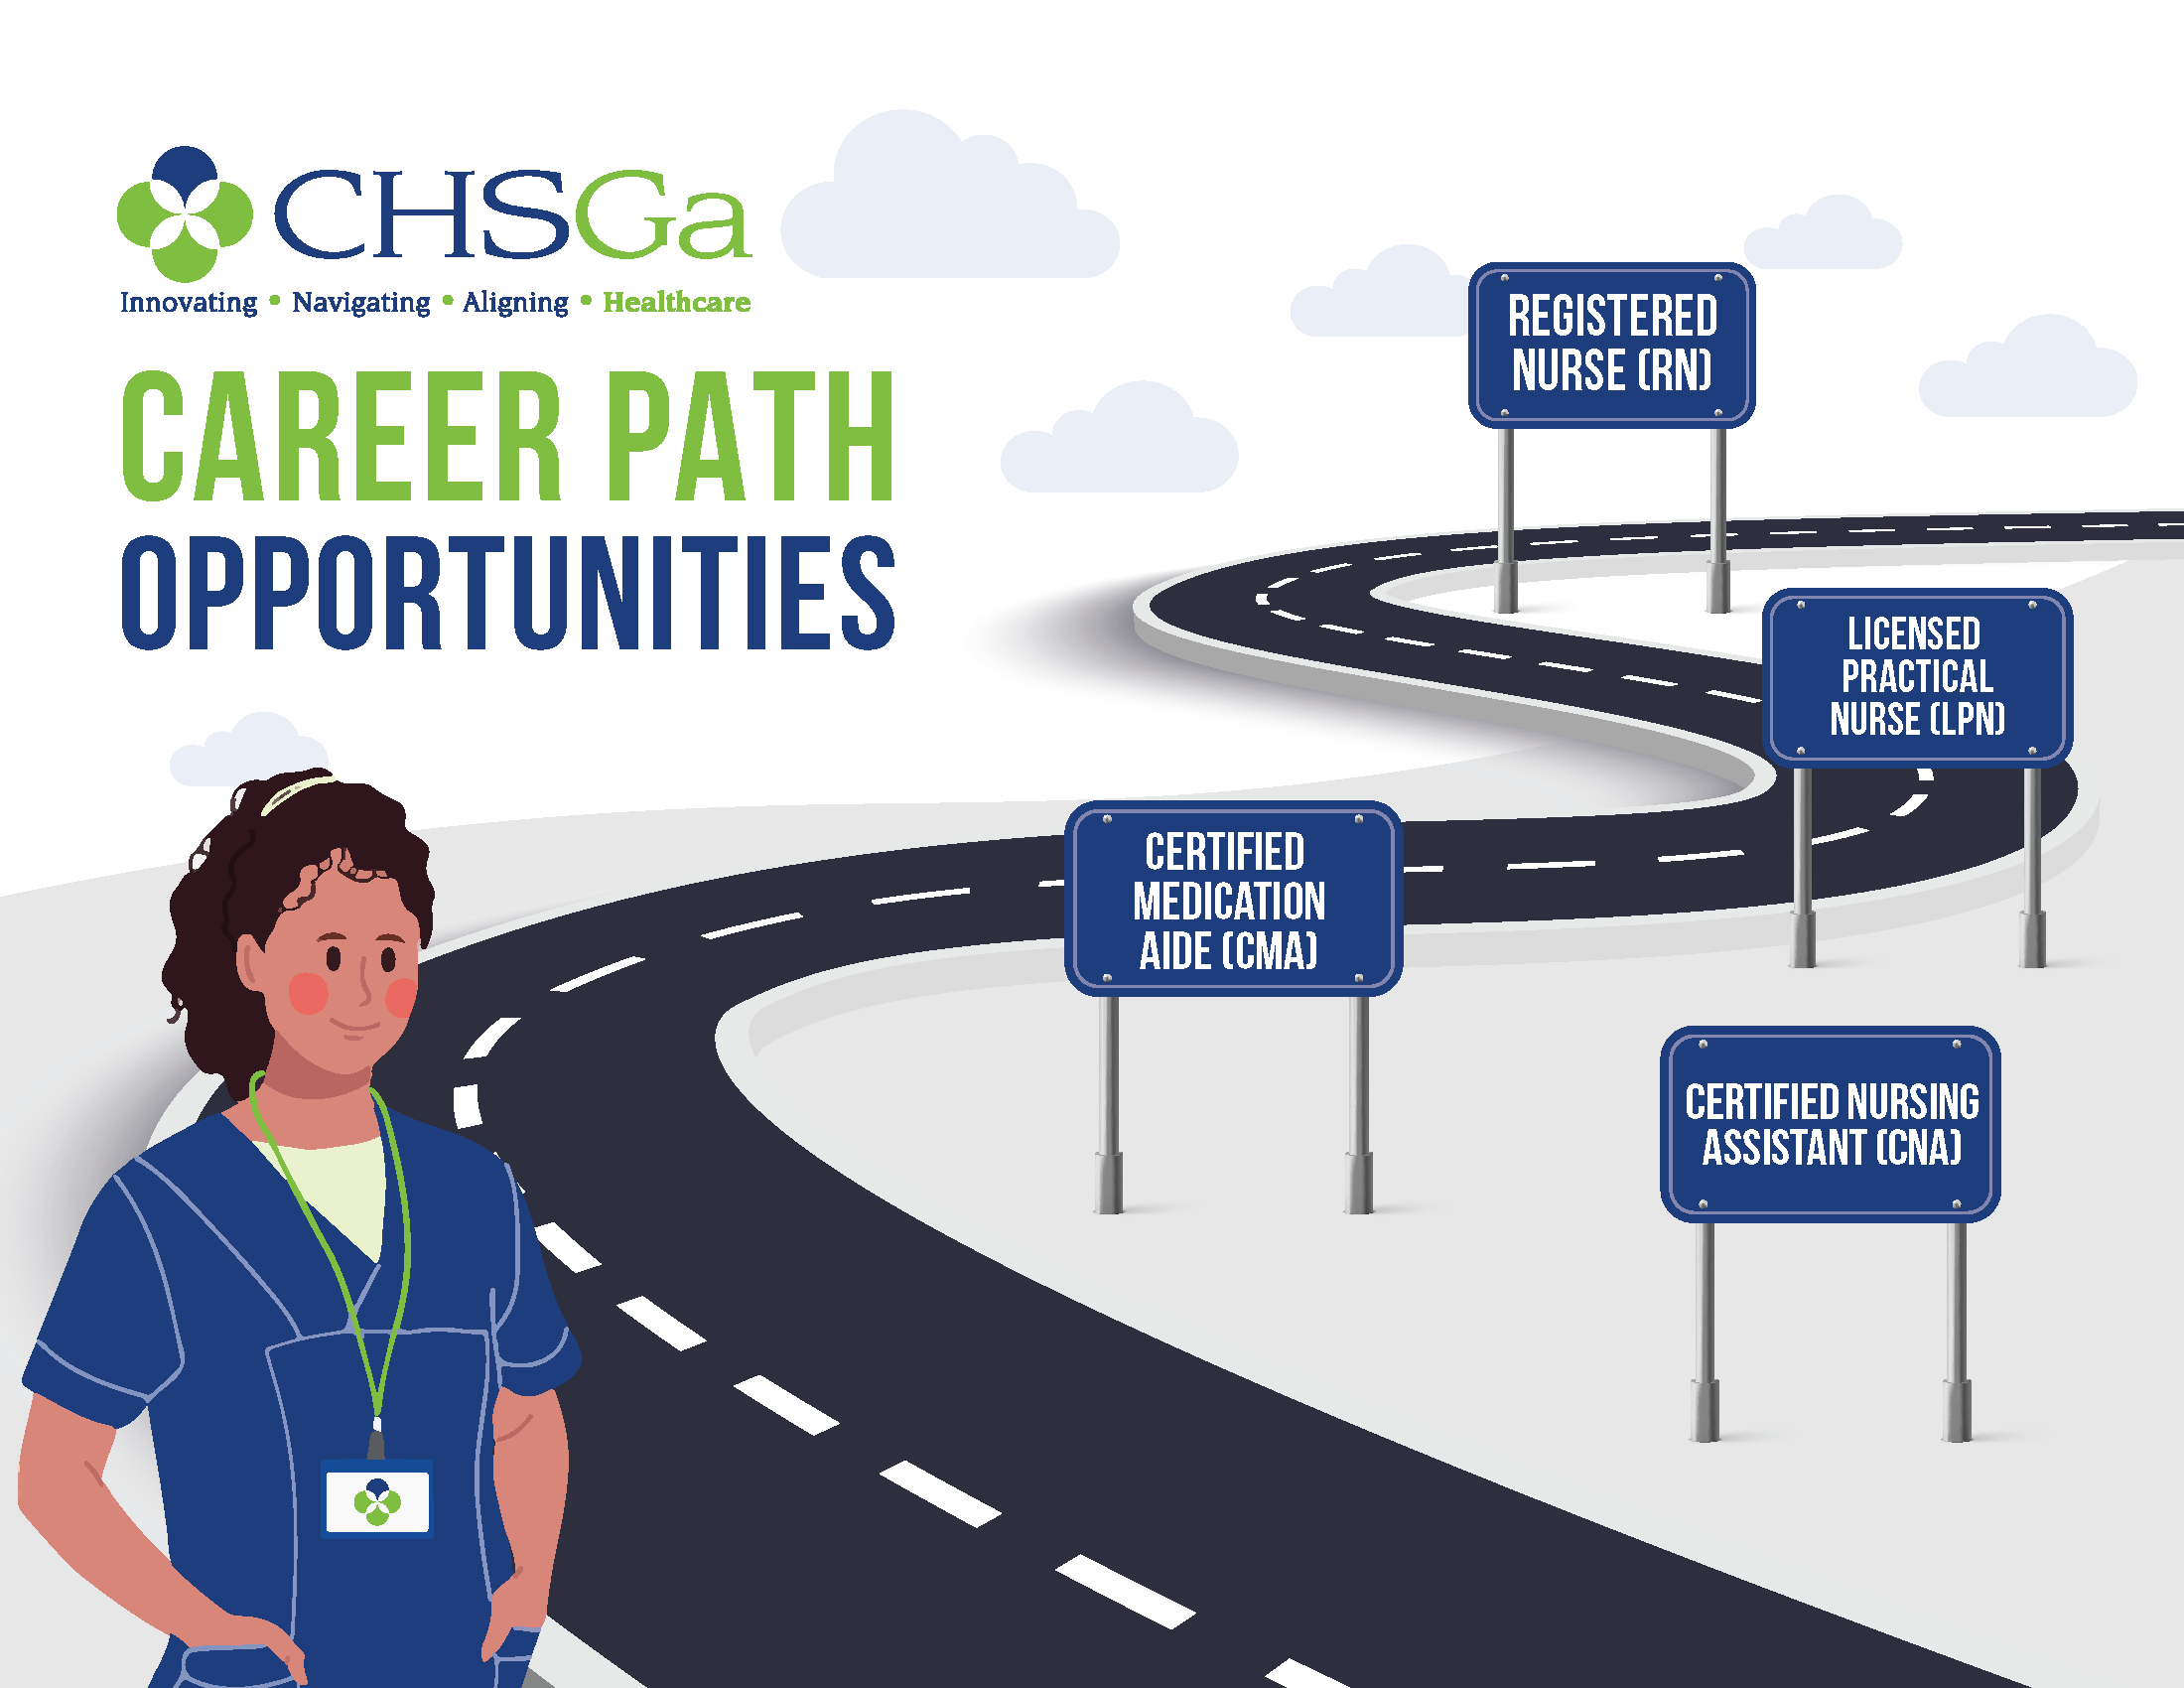 Career Paths roadmap infographic